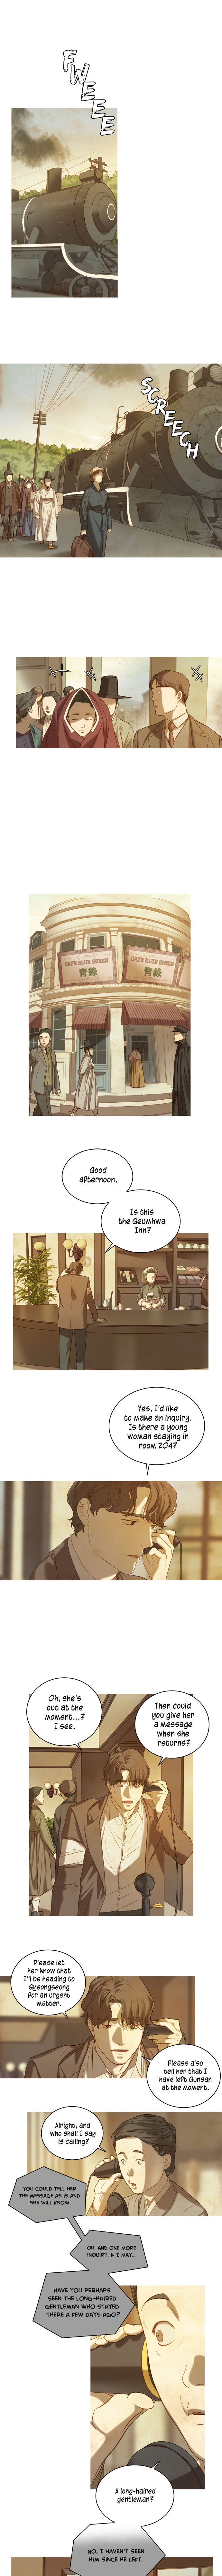 Gorae Byul - The Gyeongseong Mermaid - Chapter 6 Page 1